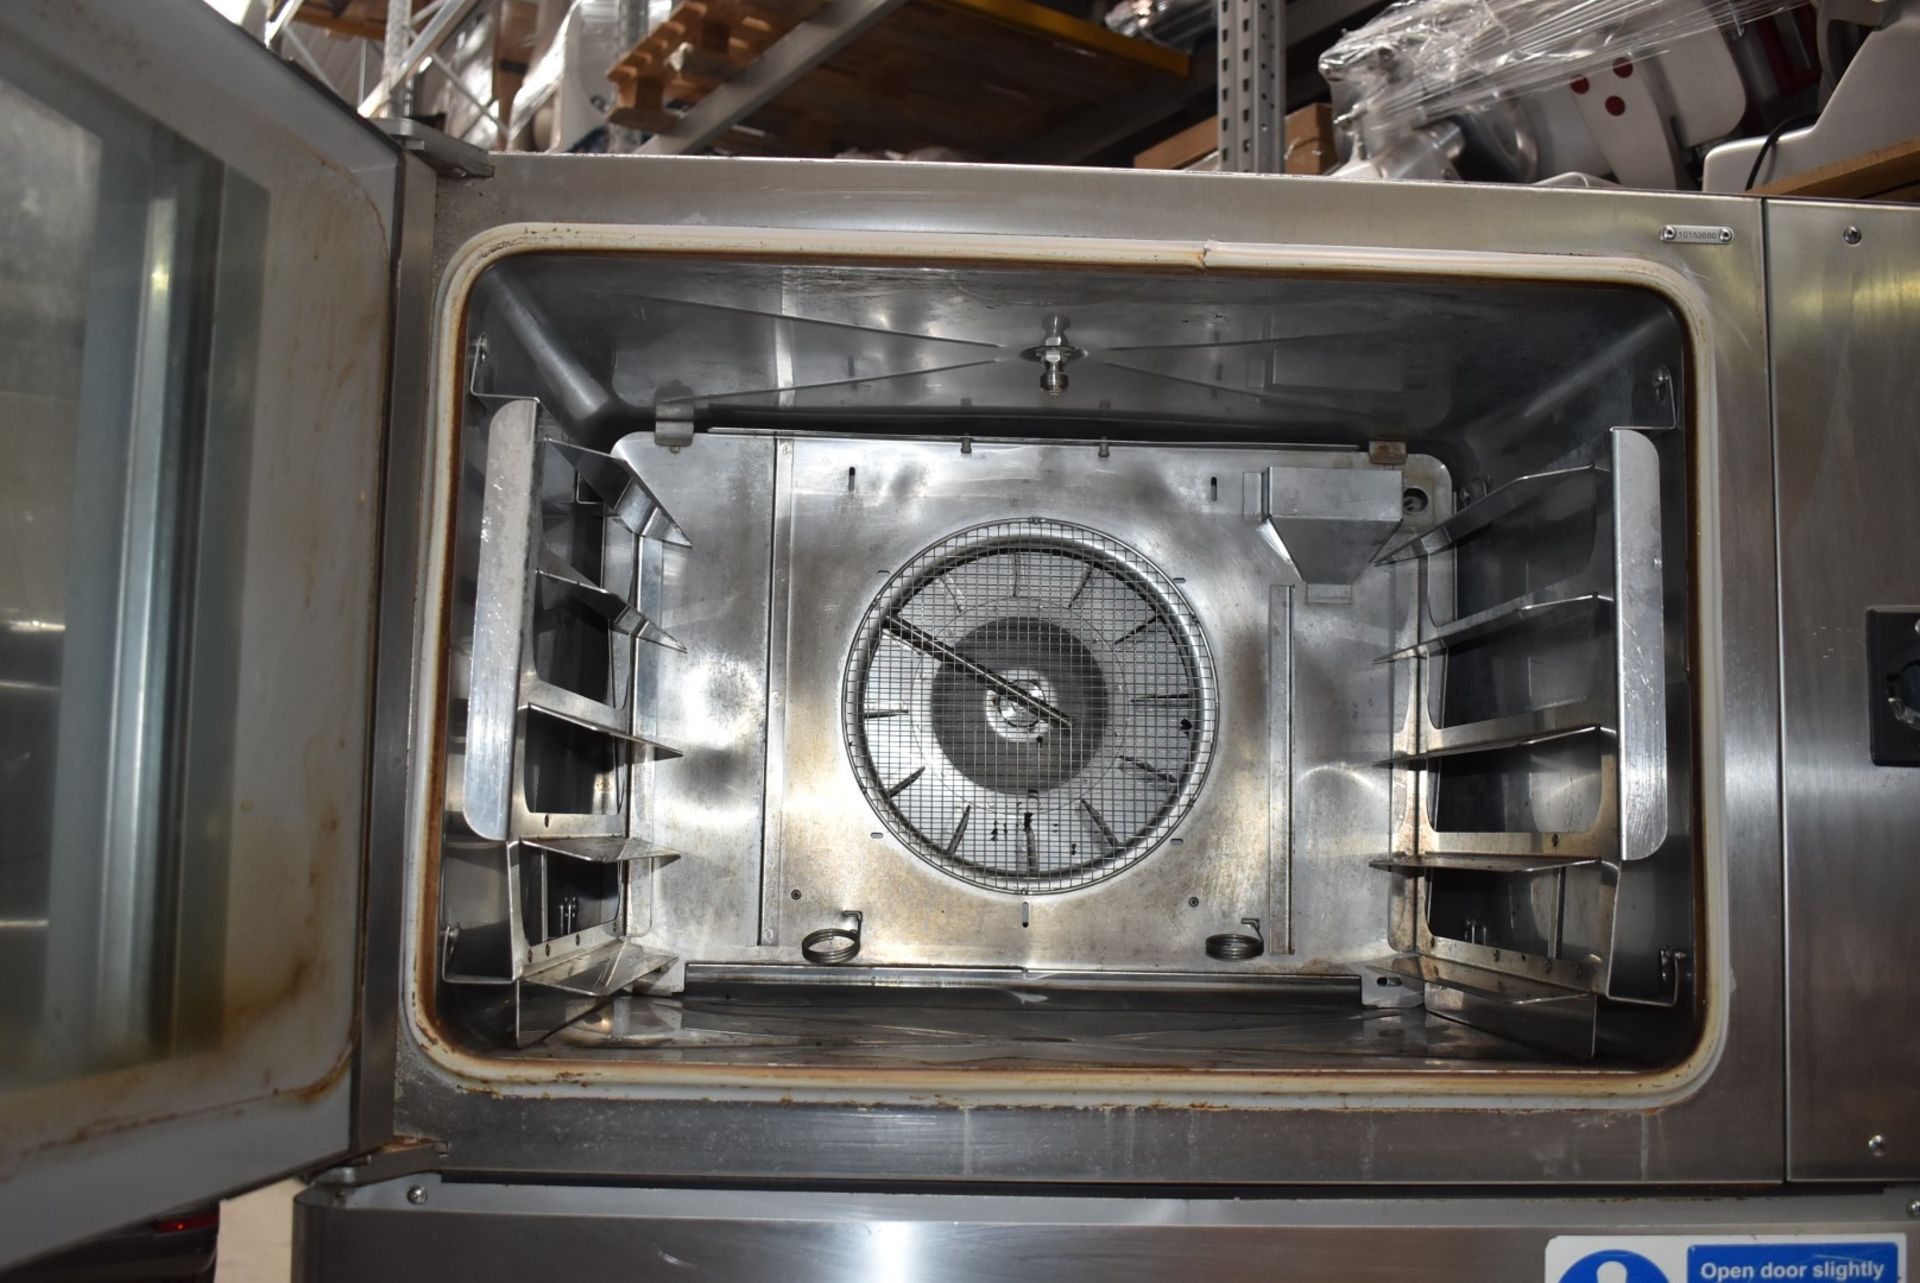 1 x Wiesheu B4-E2 Duo Commercial Convection Oven With Stainless Steel Exterior - Image 11 of 12